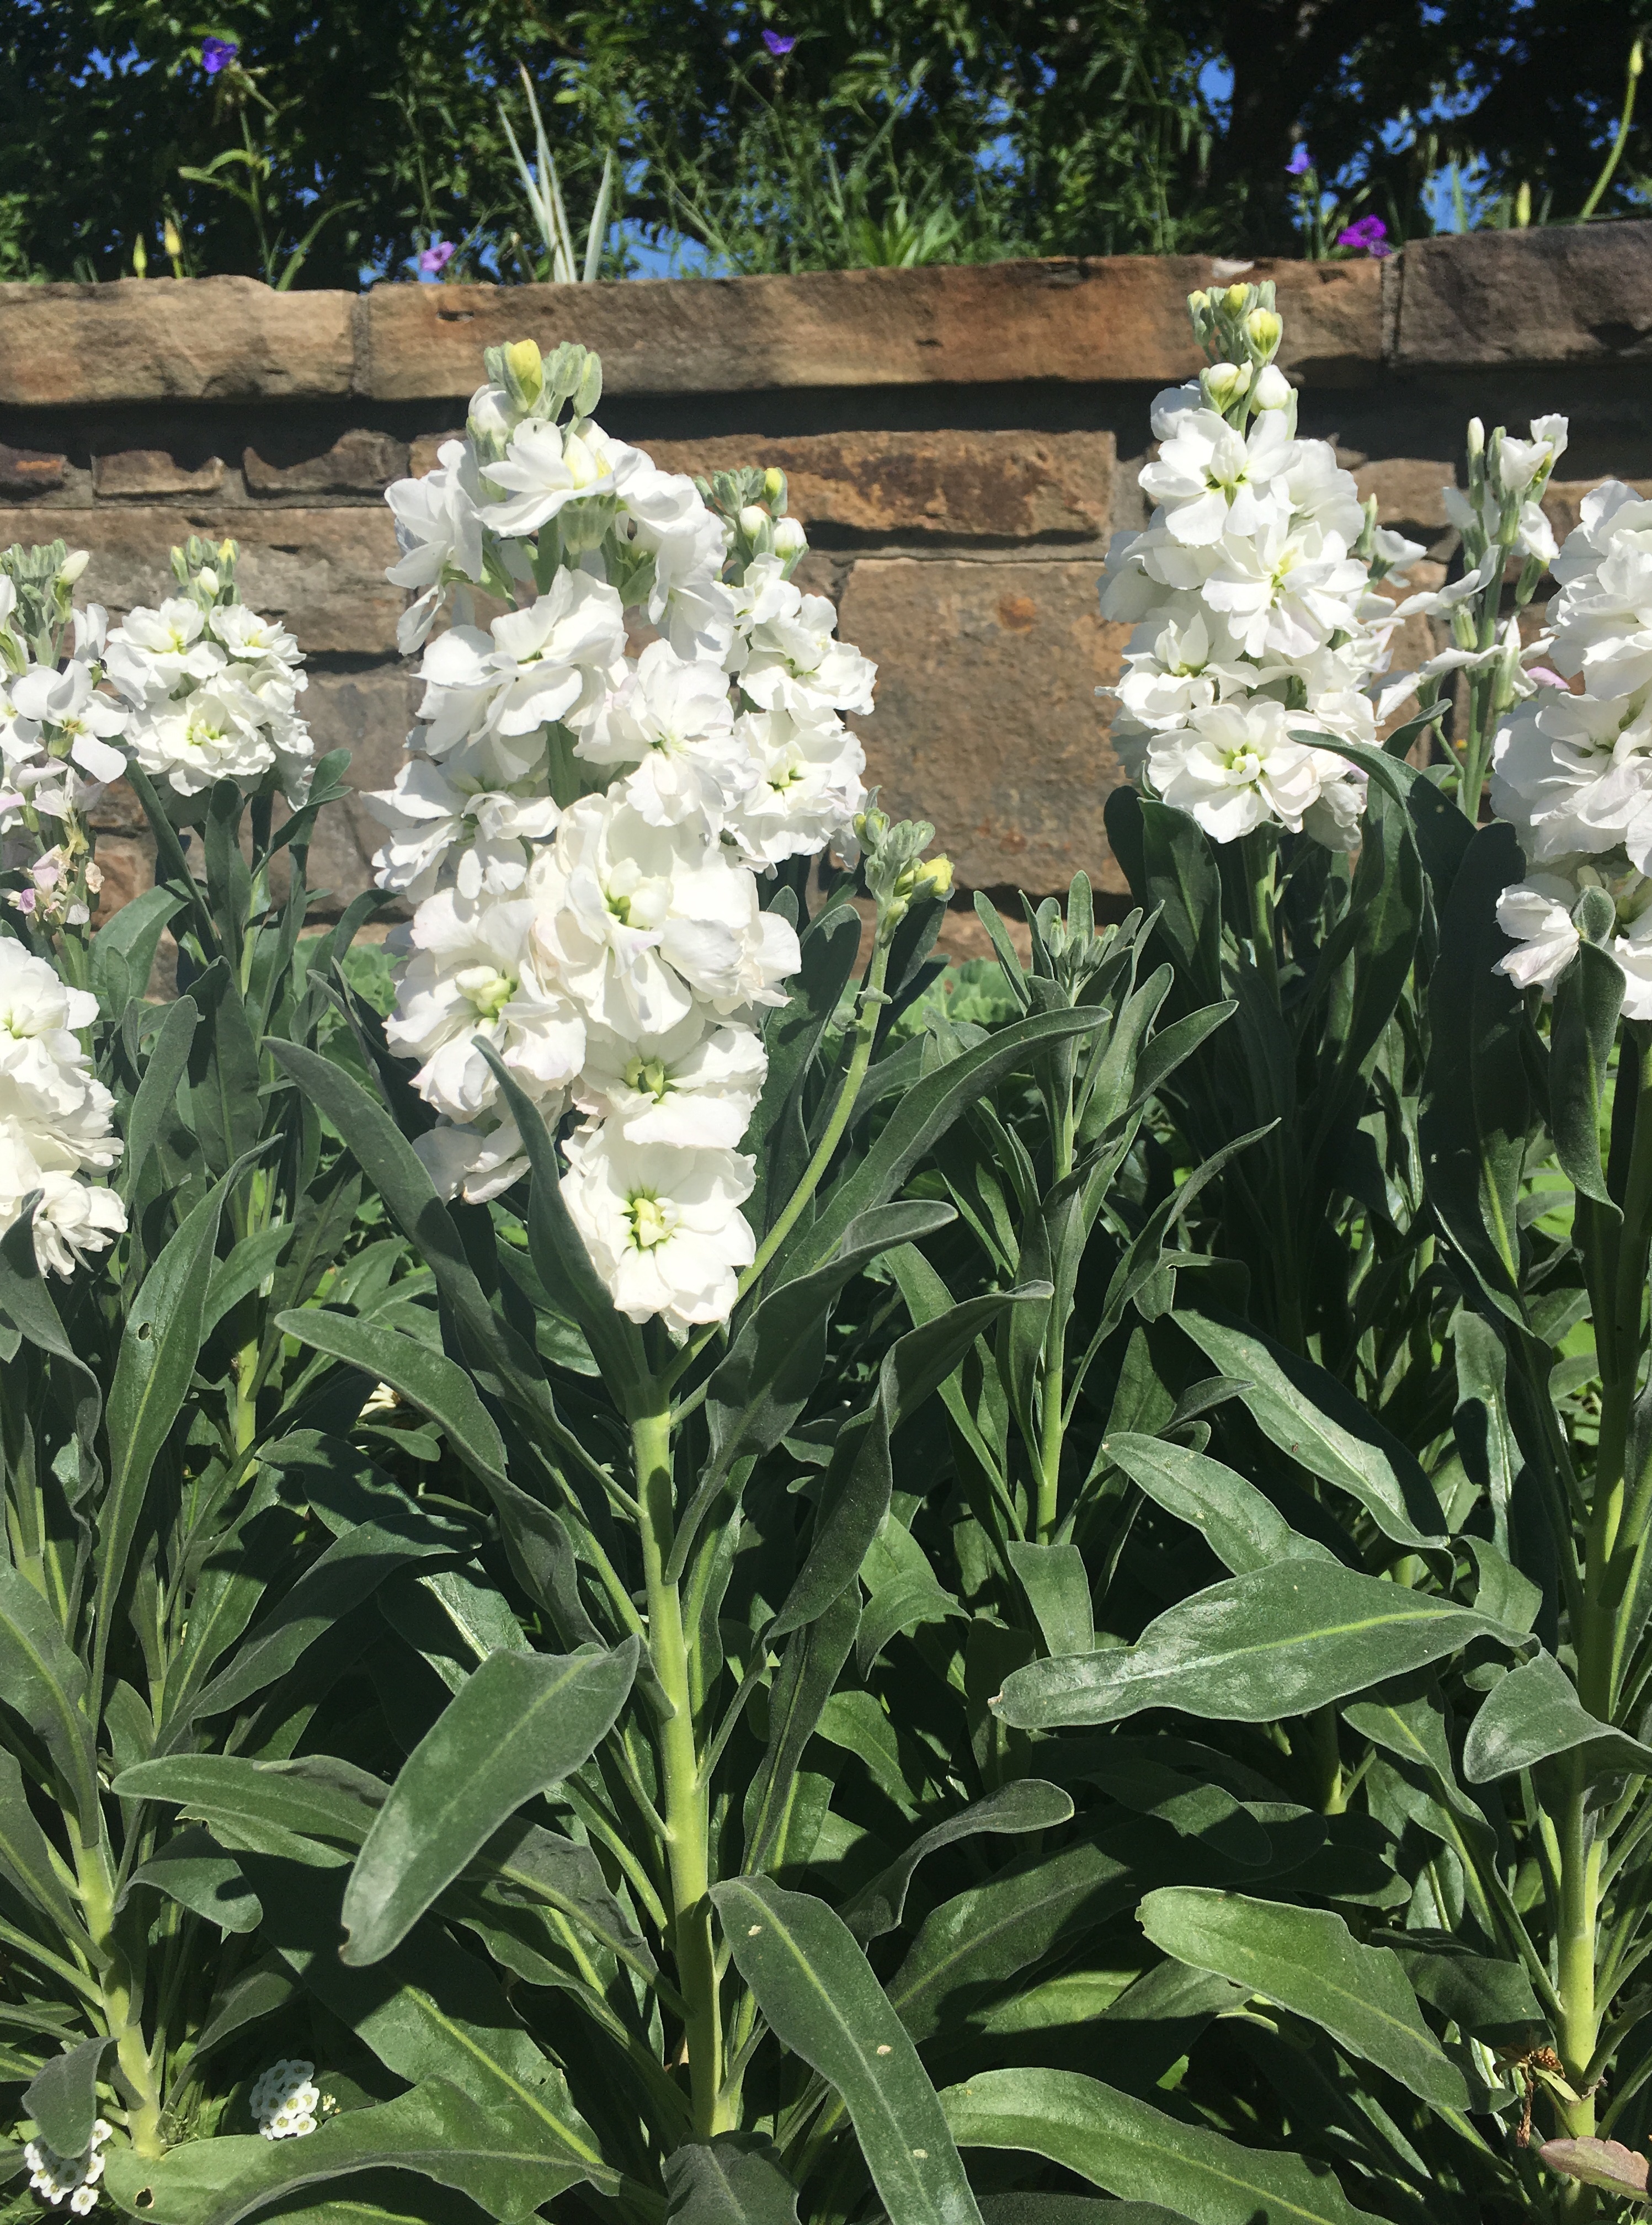 White flowers atop a tall green stem in front of a brown stone wall